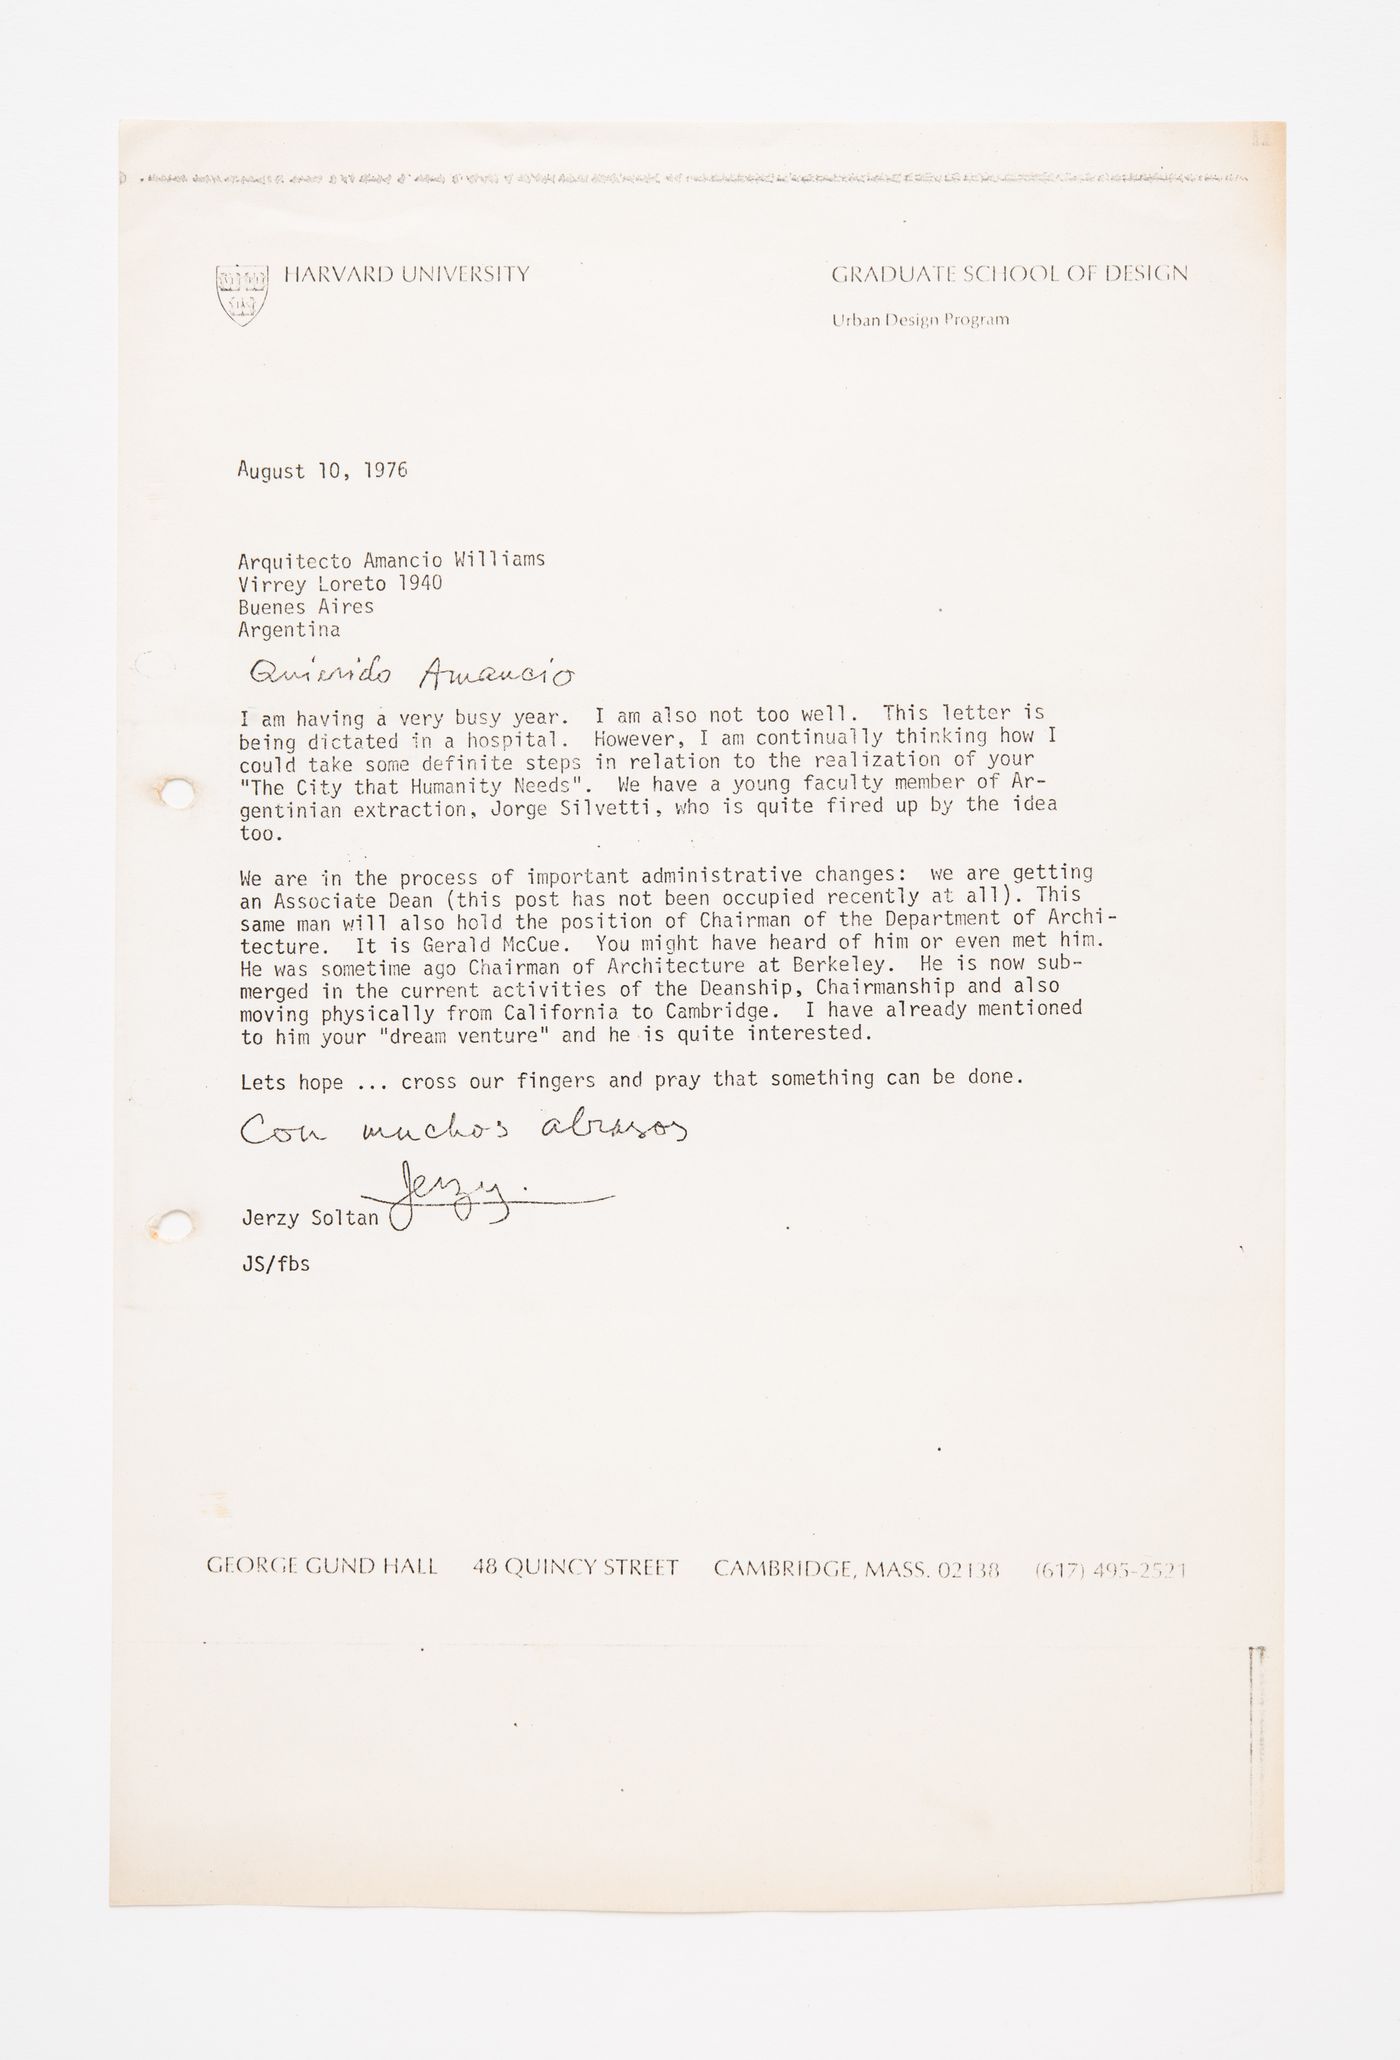 Correspondence, letter to Amancio Williams from Jerzy Soltan